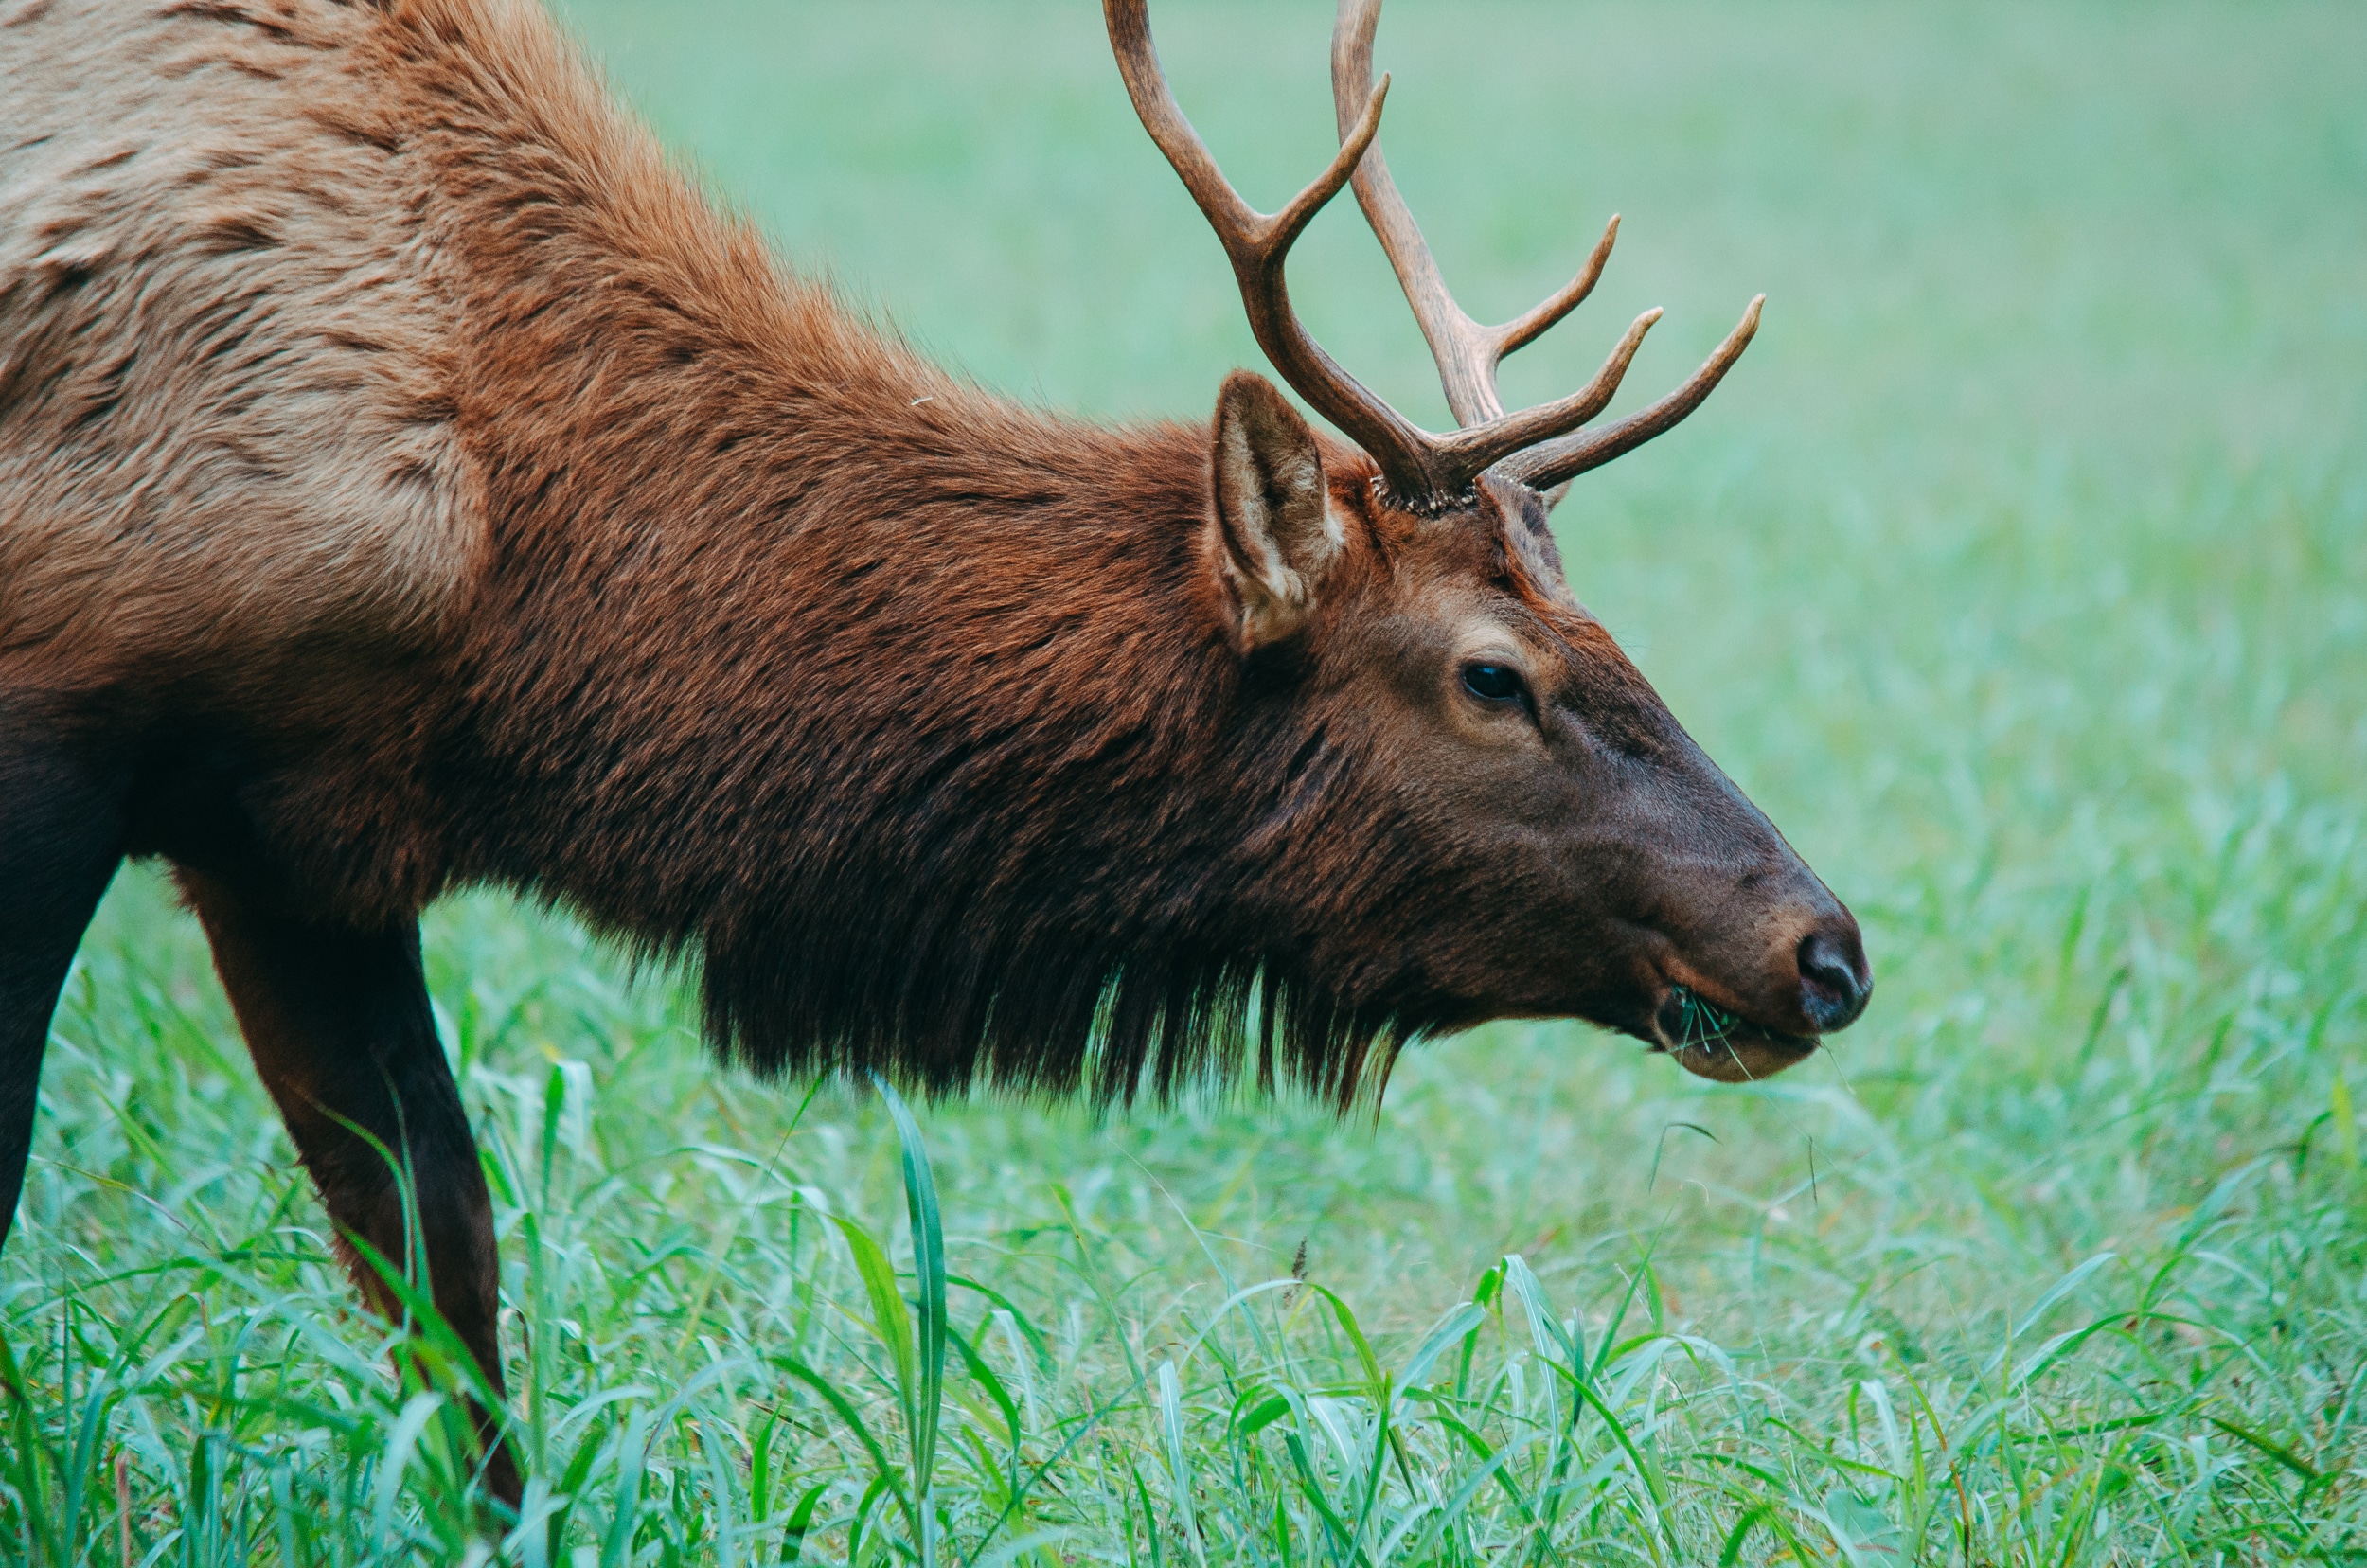 Rocky Mountain Elk spotted in Ponca, Arkansas